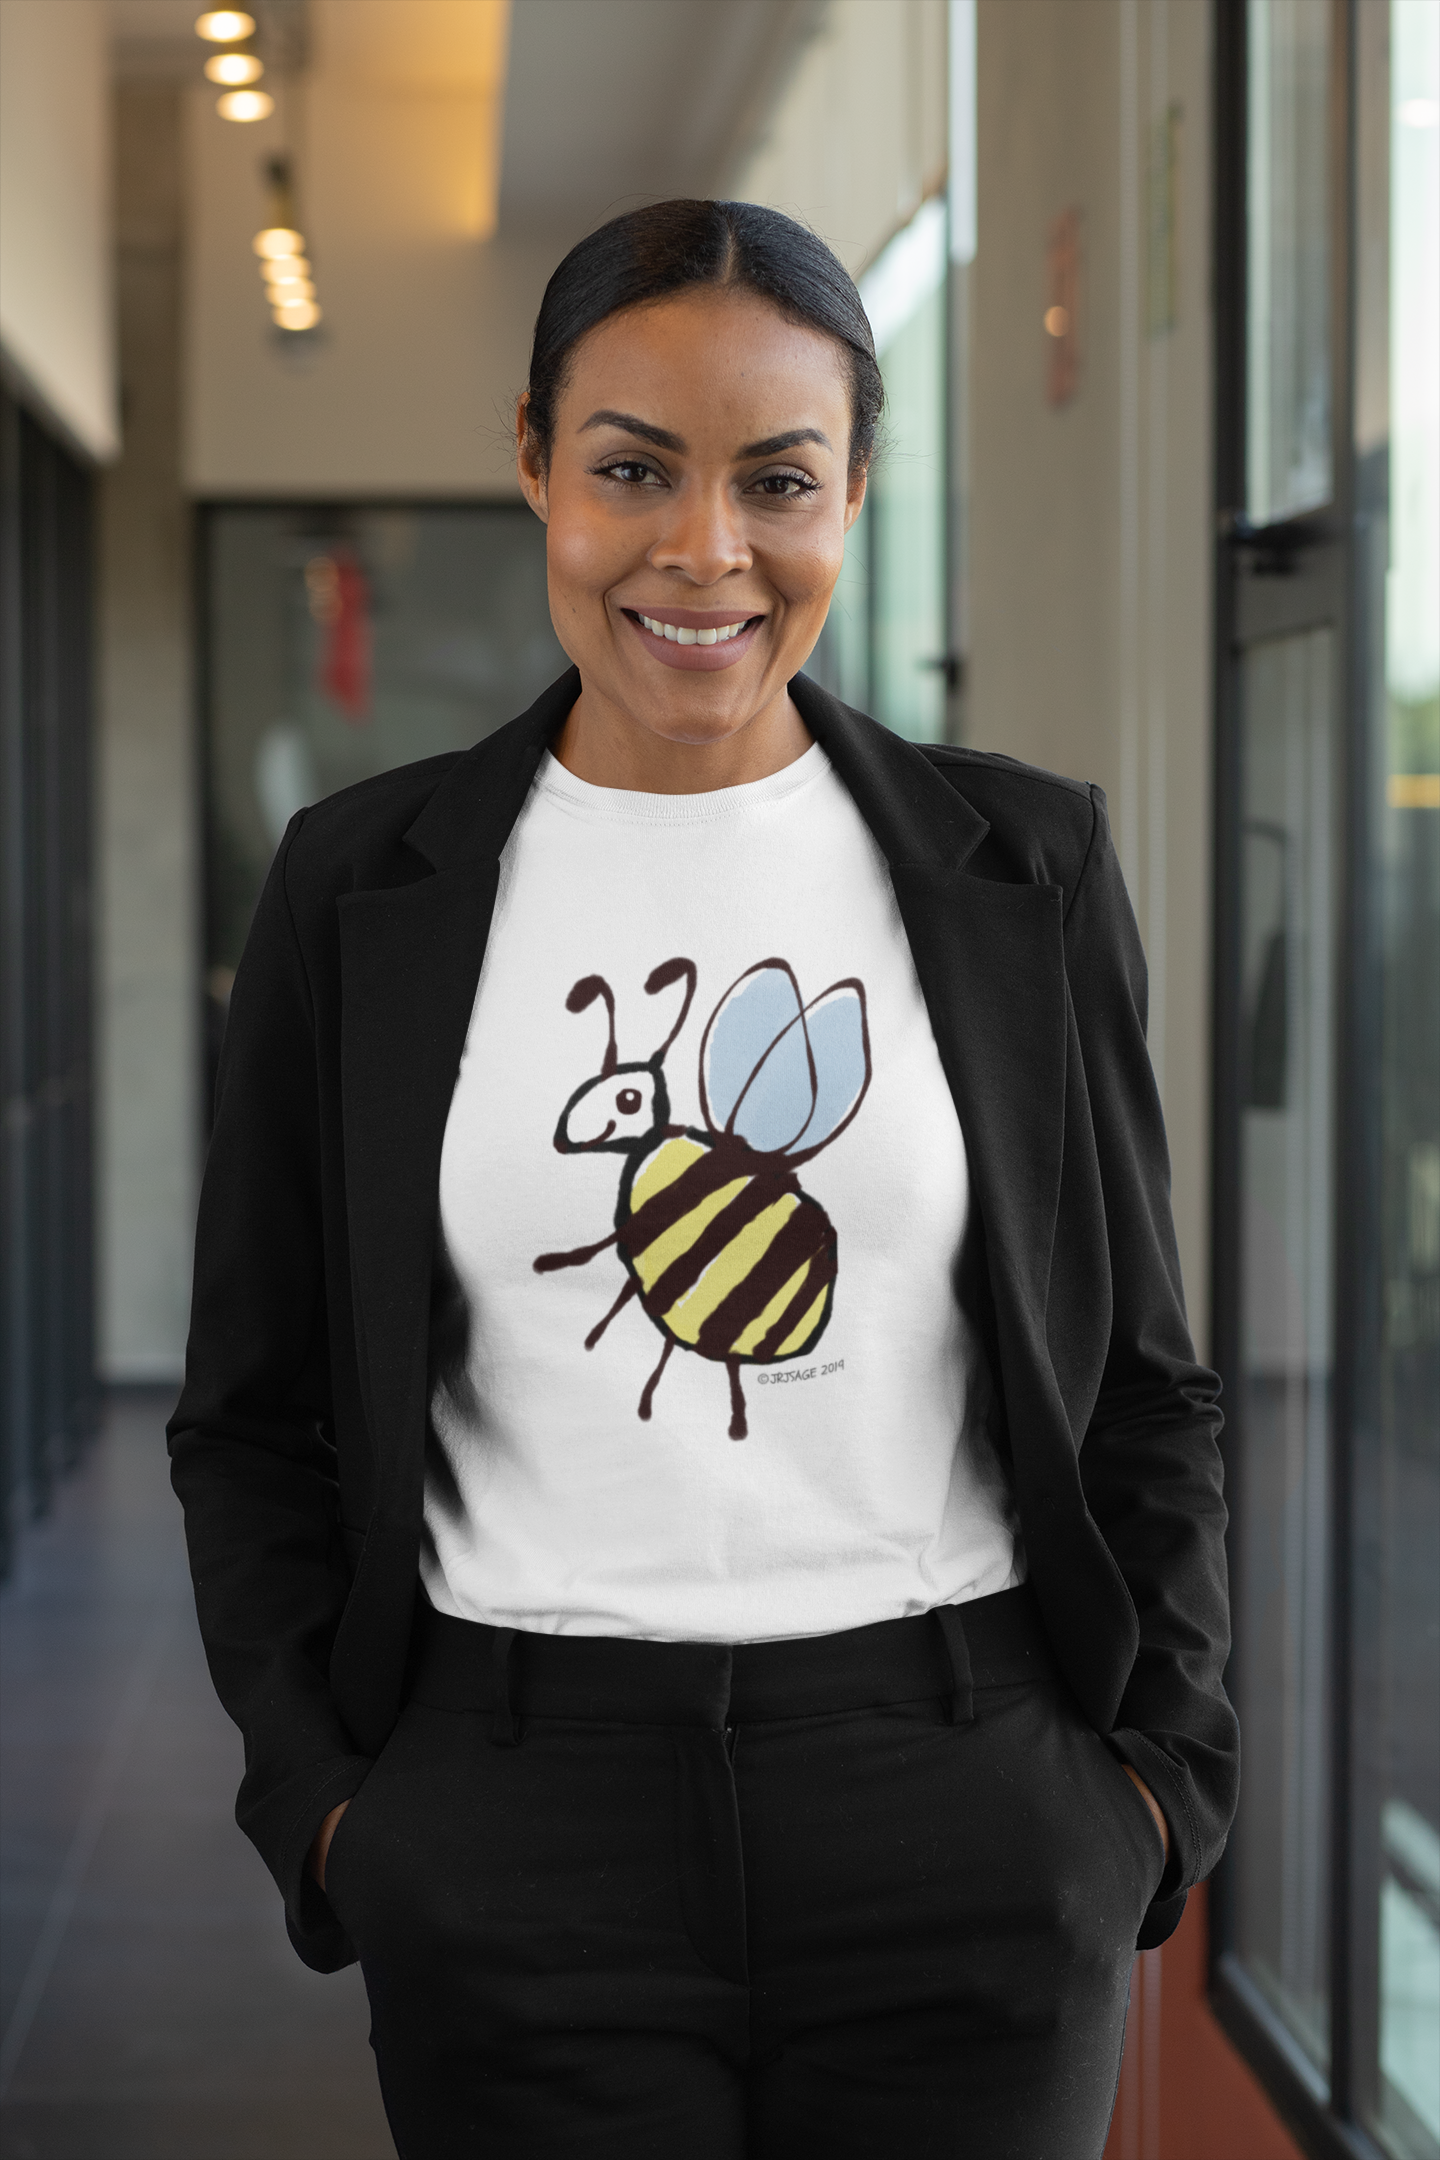 Bee T-shirt - Young woman wearing a cute Busy Bee illustrated white vegan cotton t-shirts by Hector and Bone